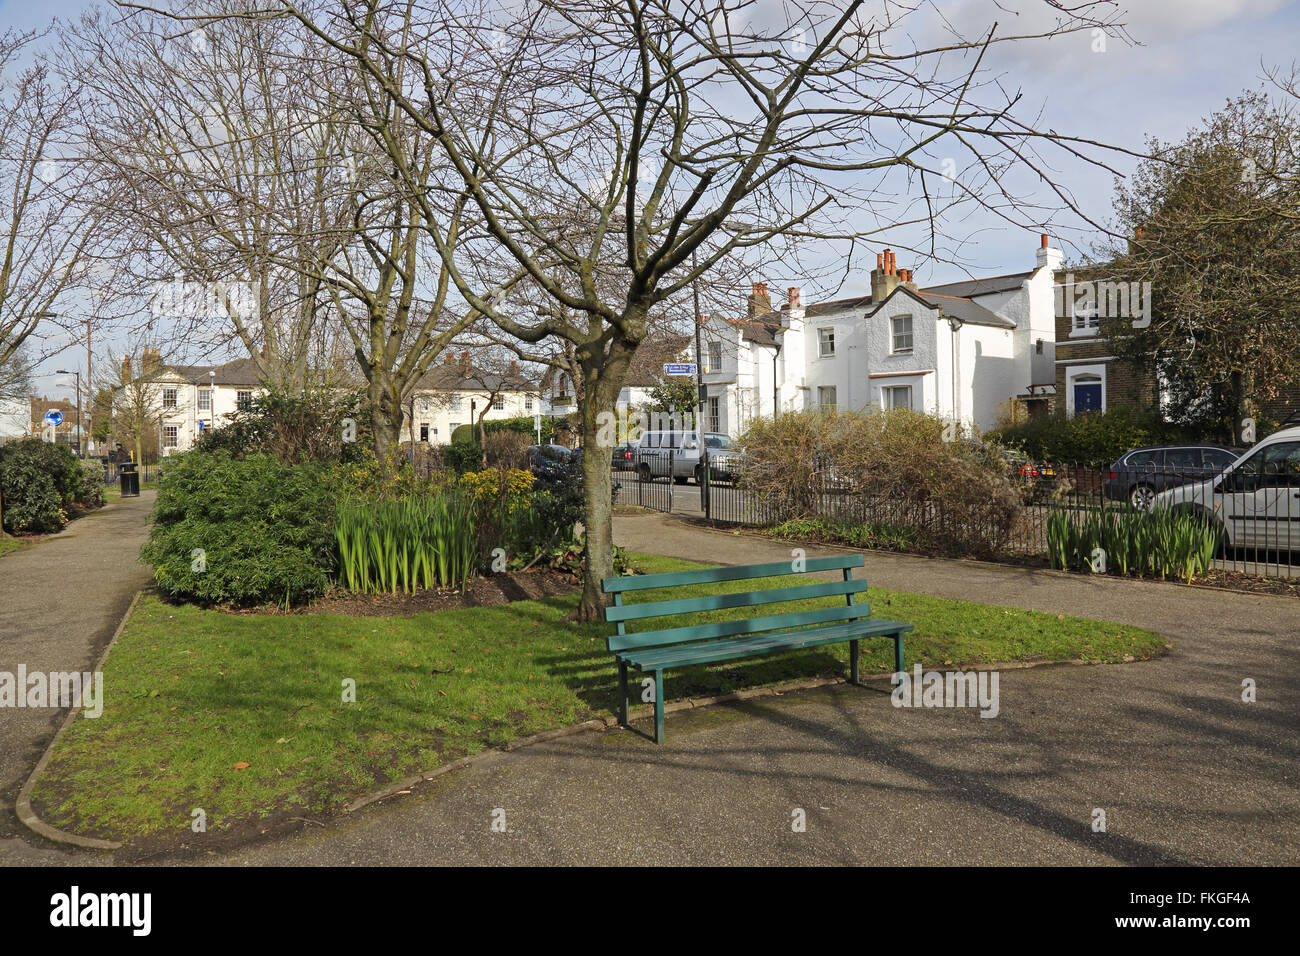 William Griggs Gardens. A small park on Bellenden Road in Peckham, London. Village atmosphere in the once famously poor area. Stock Photo